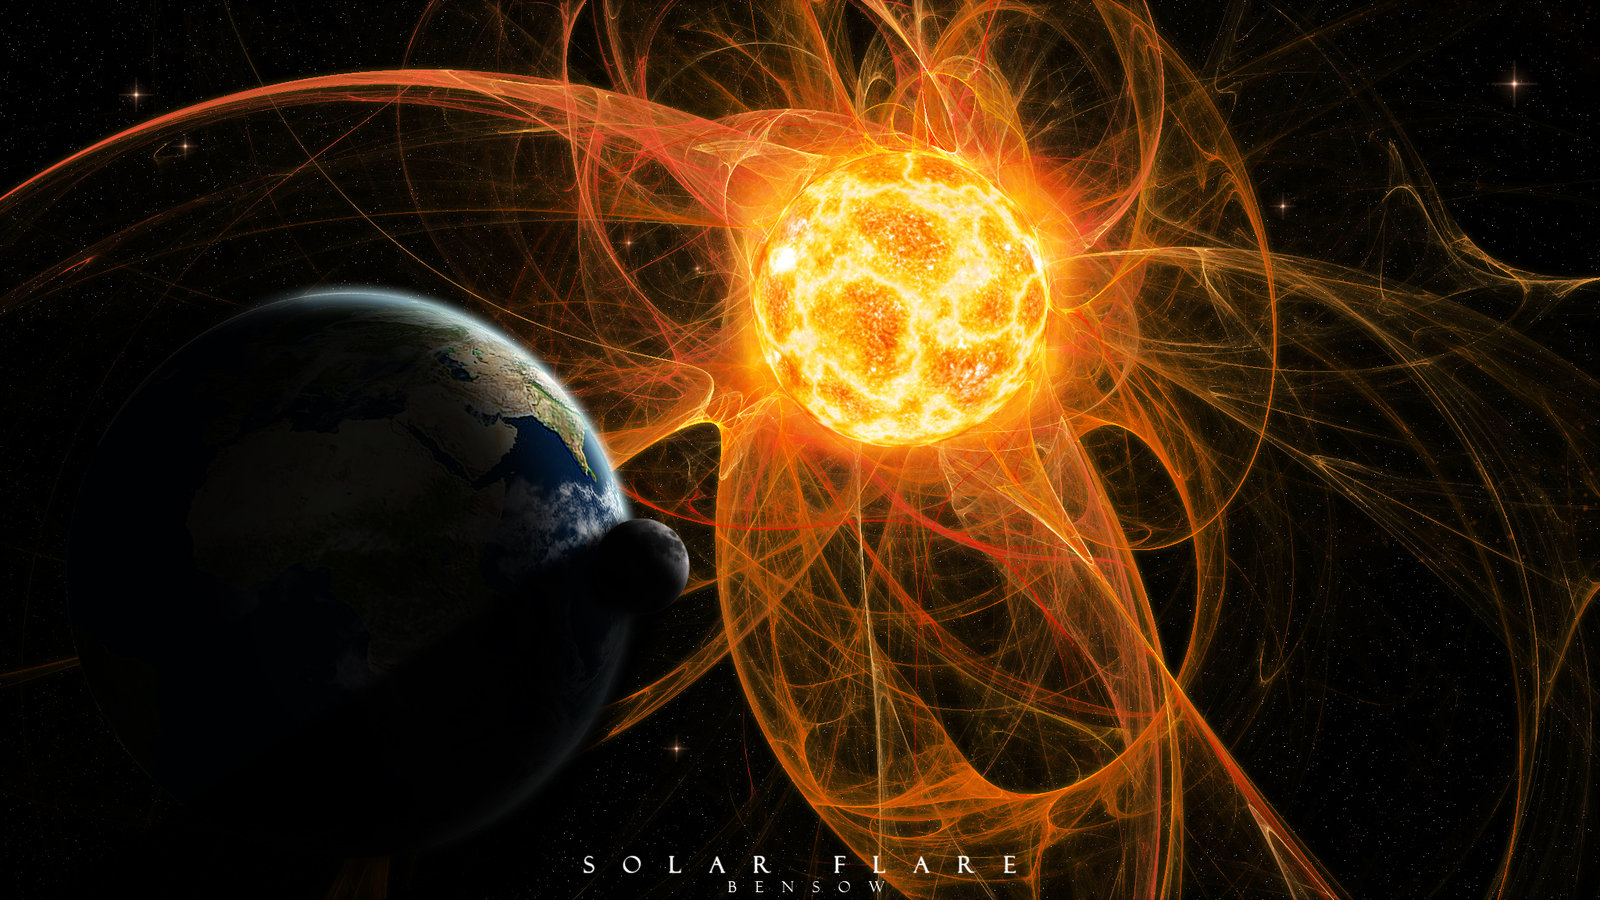 Will Solar Flare Destroy Our World